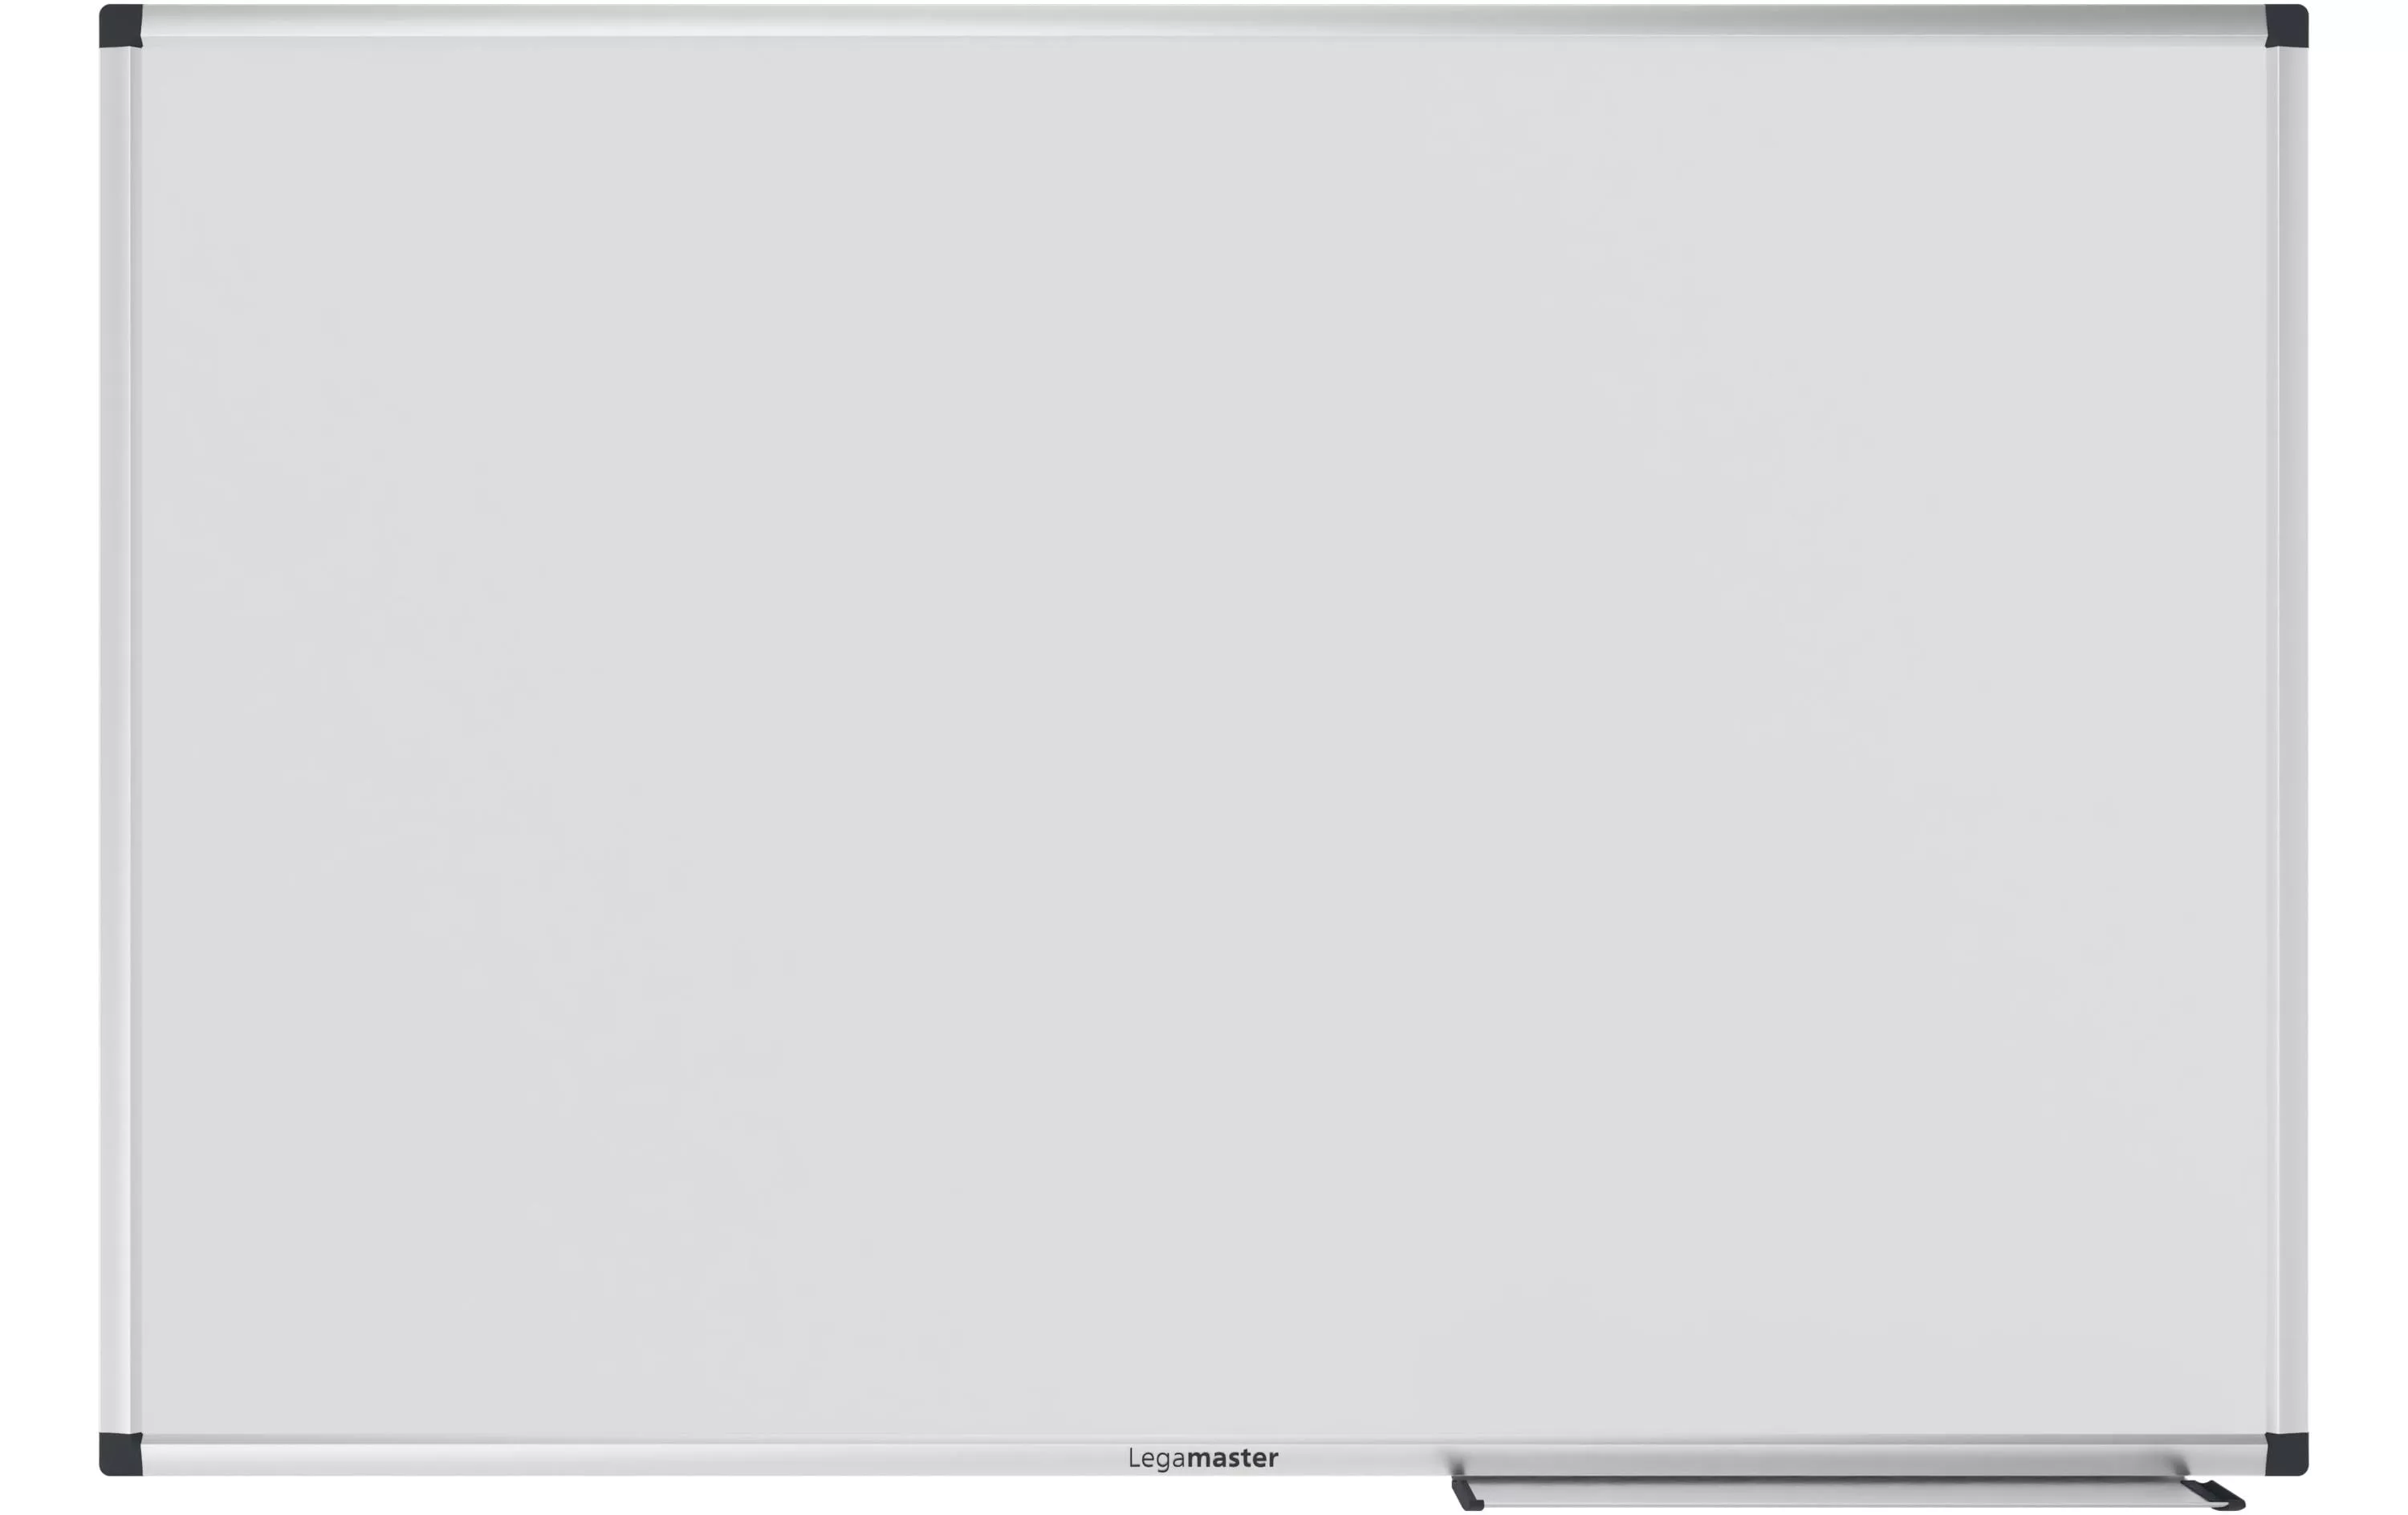 Magnethaftendes Whiteboard Unite 60 cm x 90 cm, Weiss